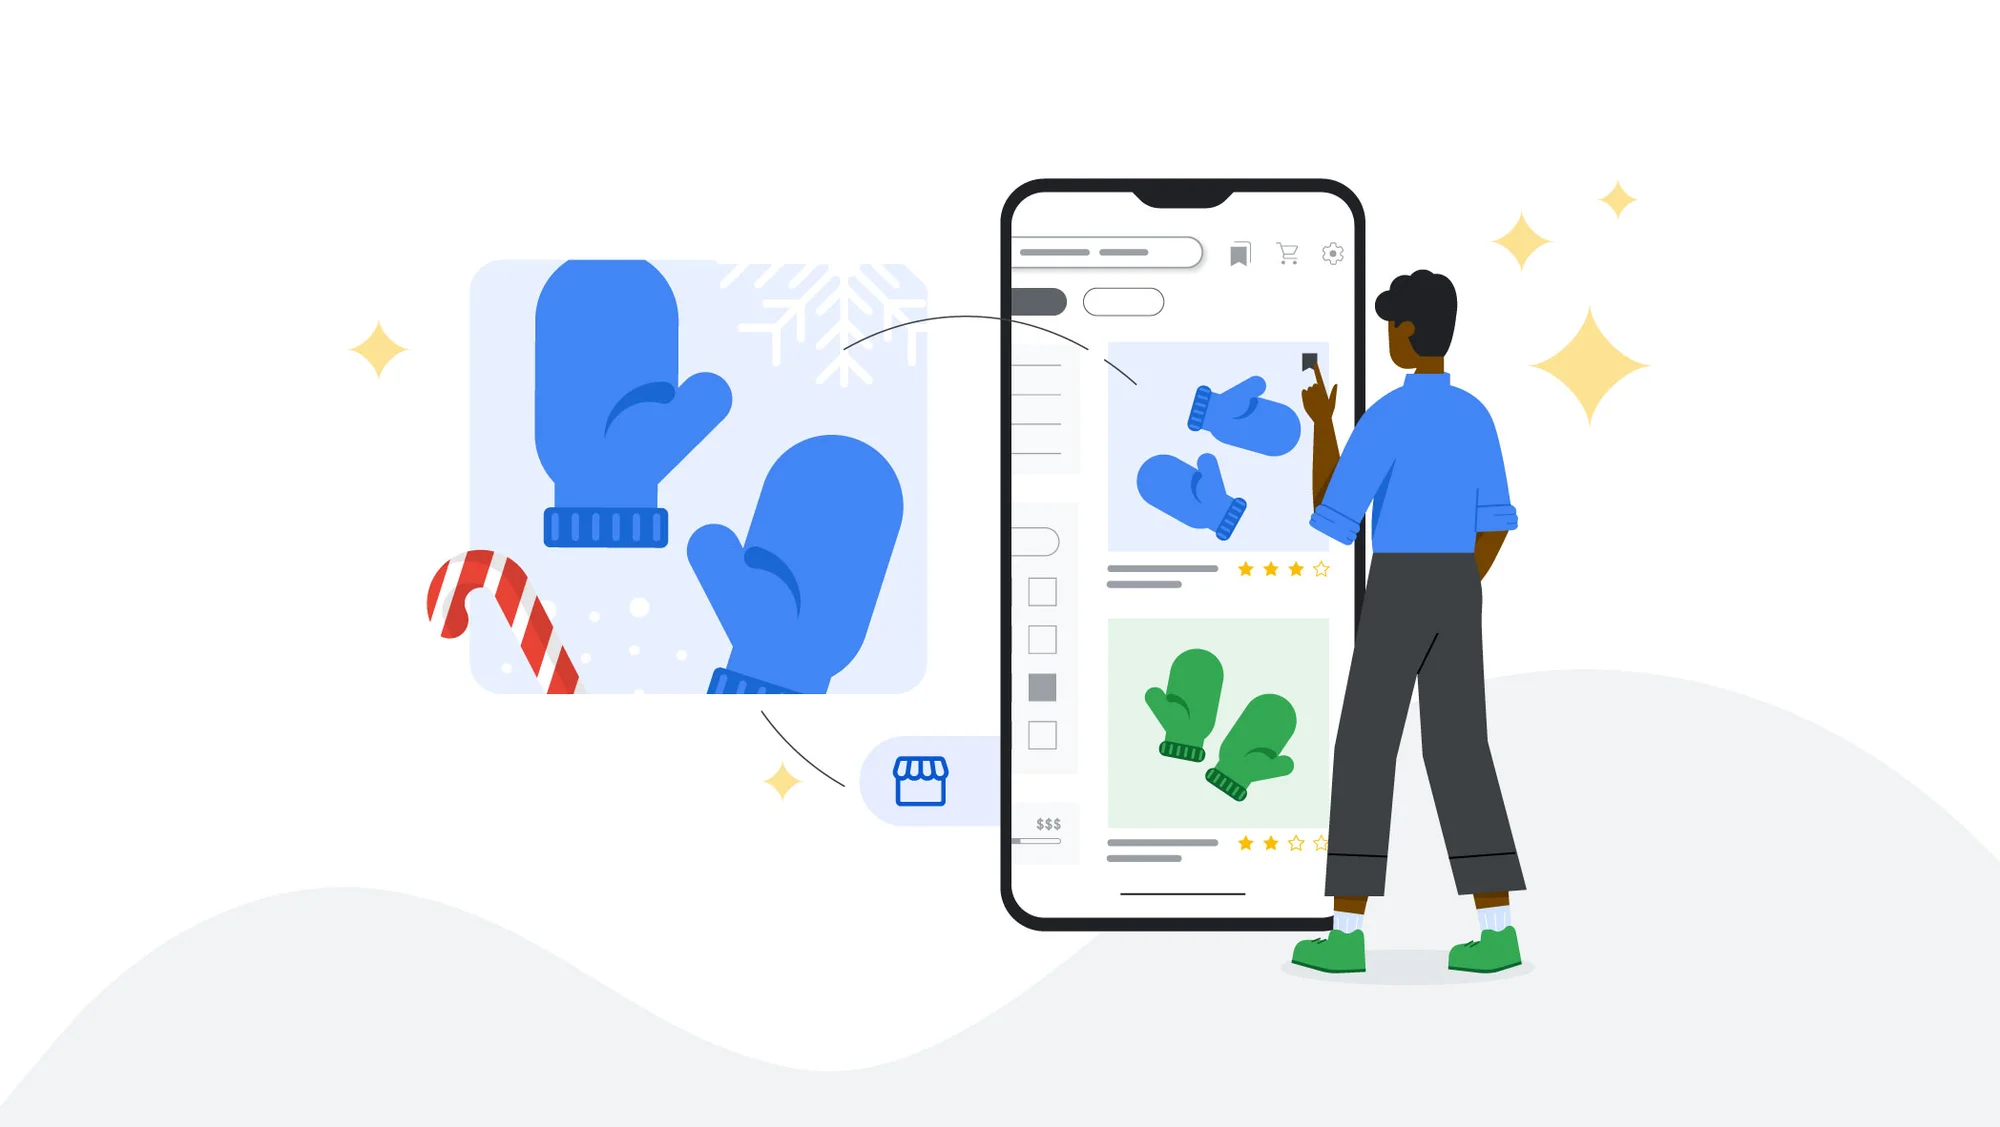 Facebook Rolls Out 'SMB Guide' For Small Businesses To Move Online